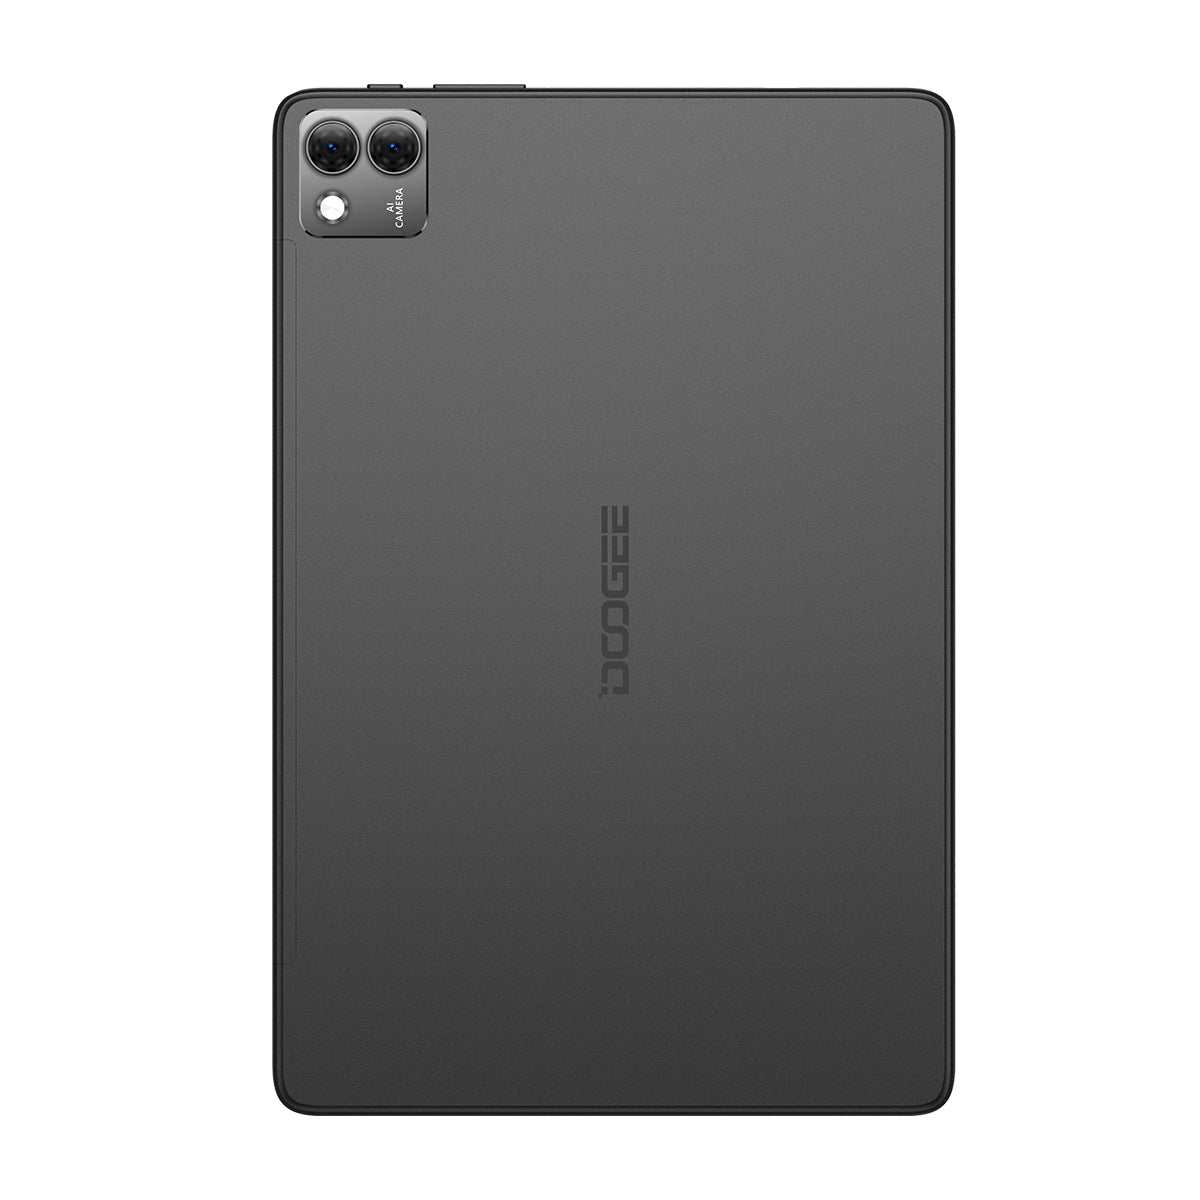 DOOGEE T10E Android Tablet 2023,Latest Octa-Core Processor,9GB+128GB/TF  1TB,10.1 inch IPS Screen Android 13 Tablet,5G/2.4G WiFi,6580mAh Battery,TUV  Eye Bluelight,Dual Speakers,Bluetooth 5.0,GPS-Black 